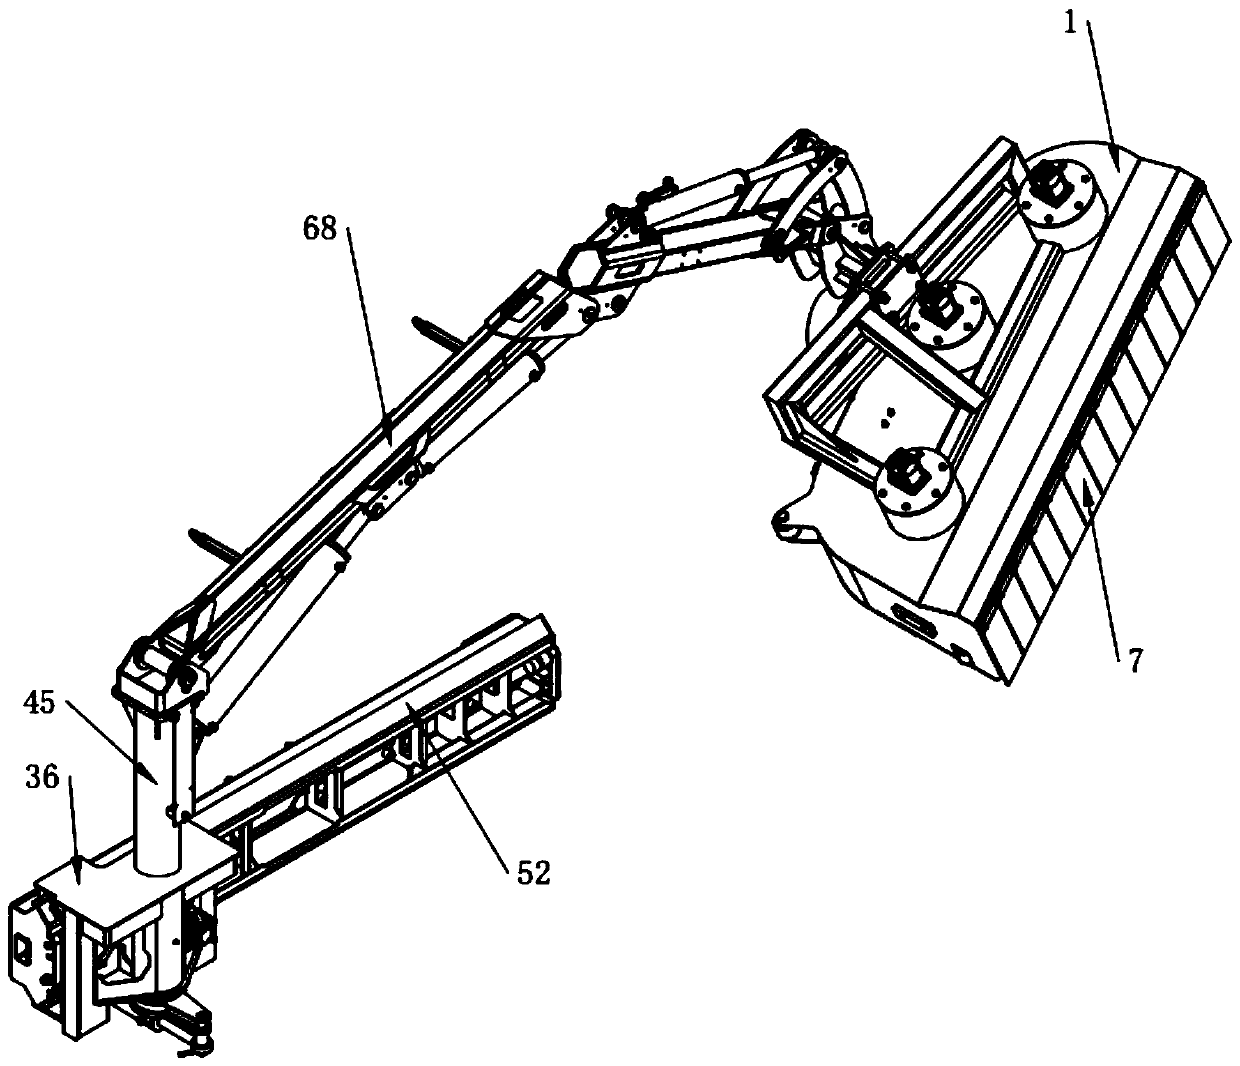 Hedge trimming device assembly